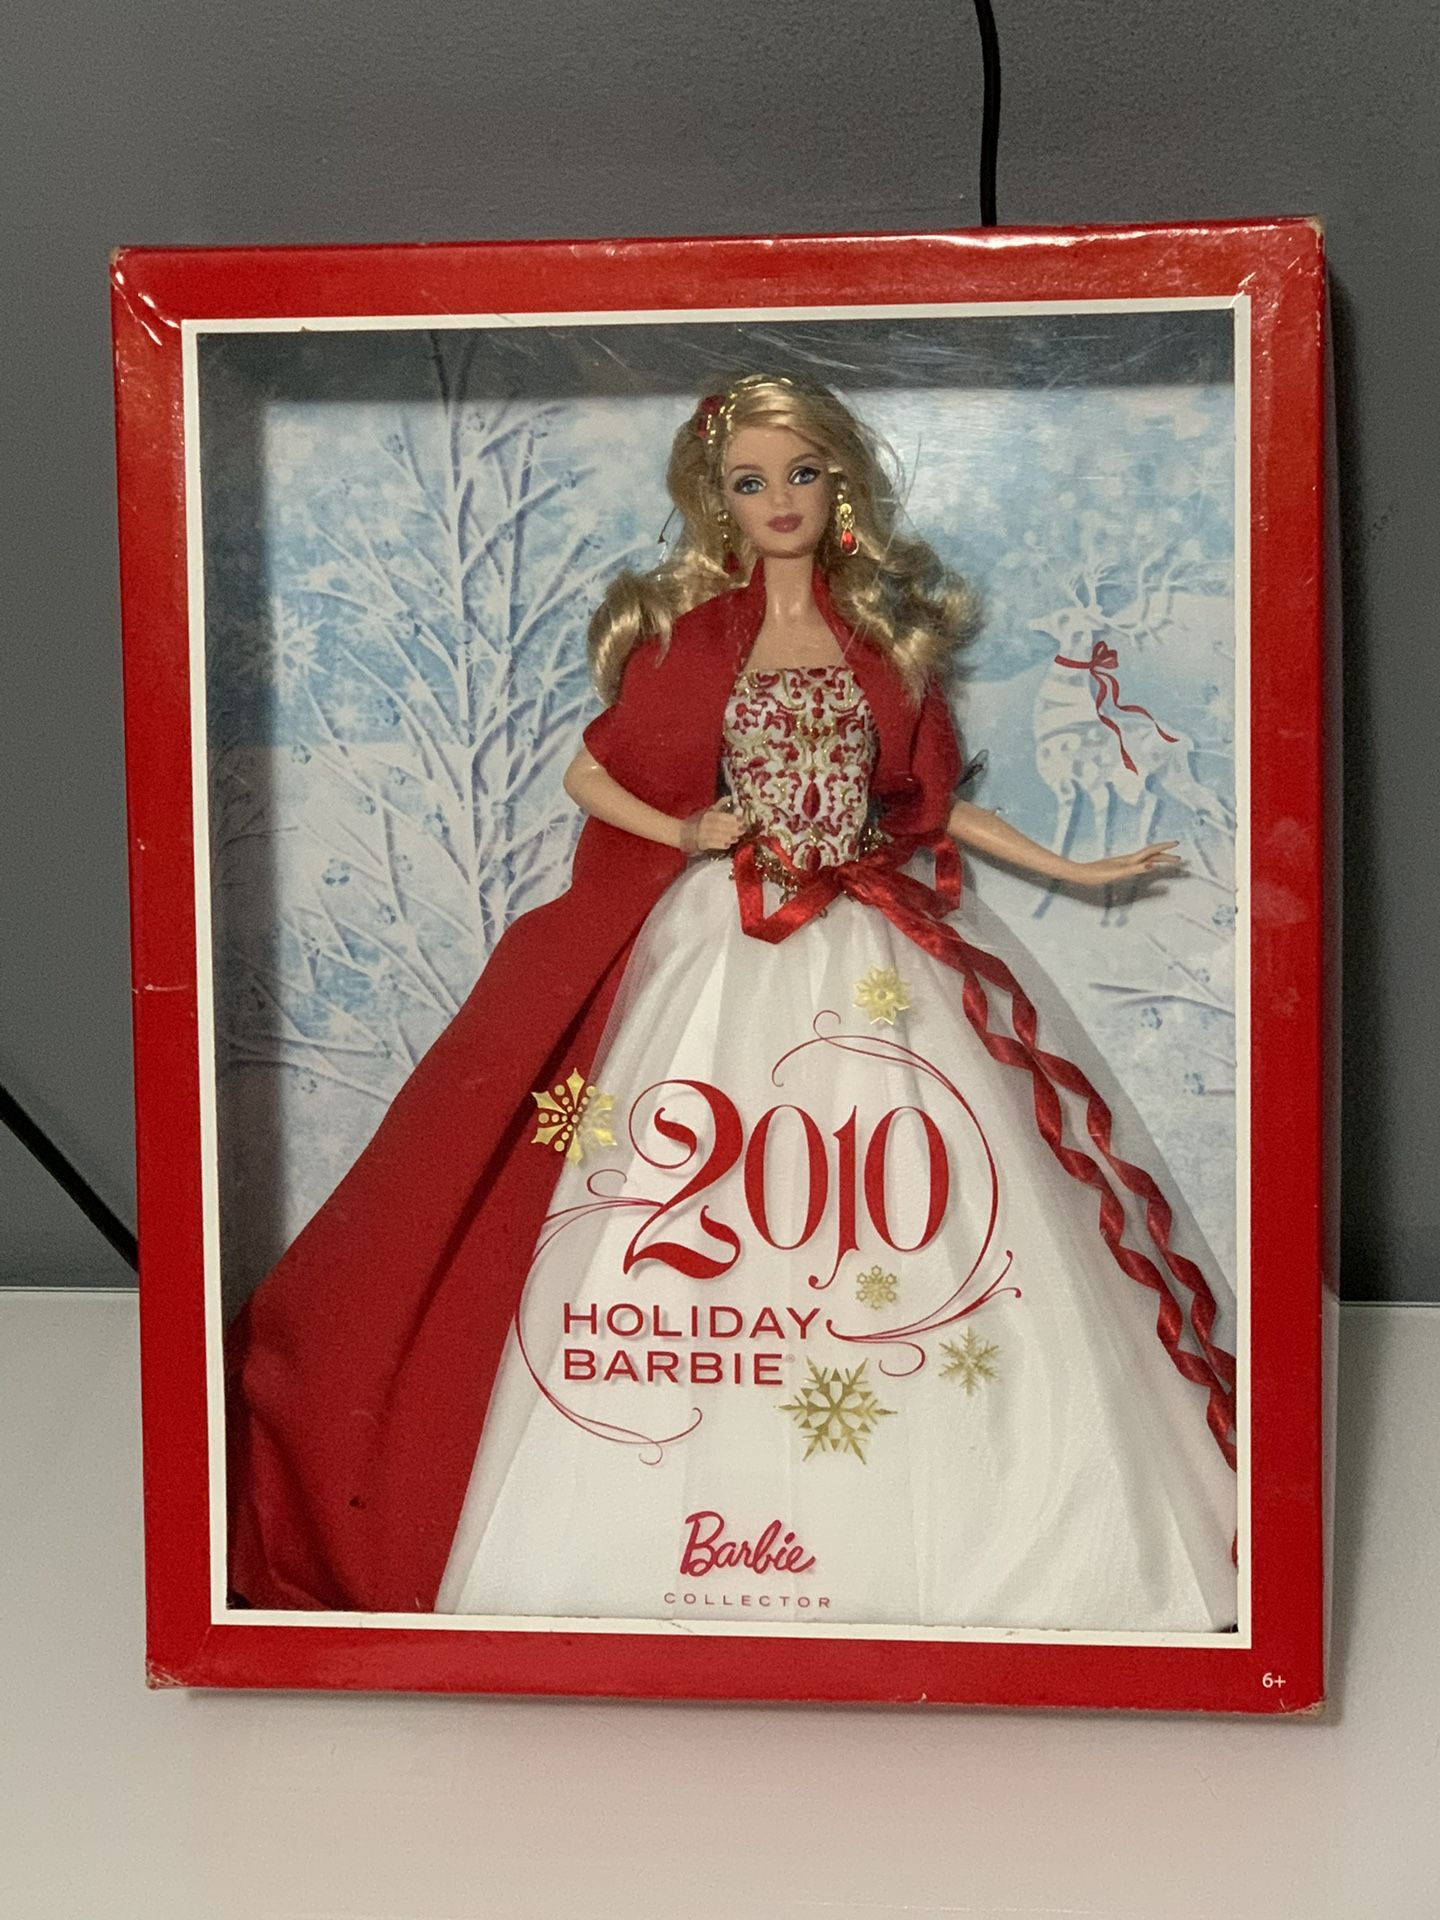 BARBIE COLLECTOR 2010 HOLIDAY BARBUE / New 